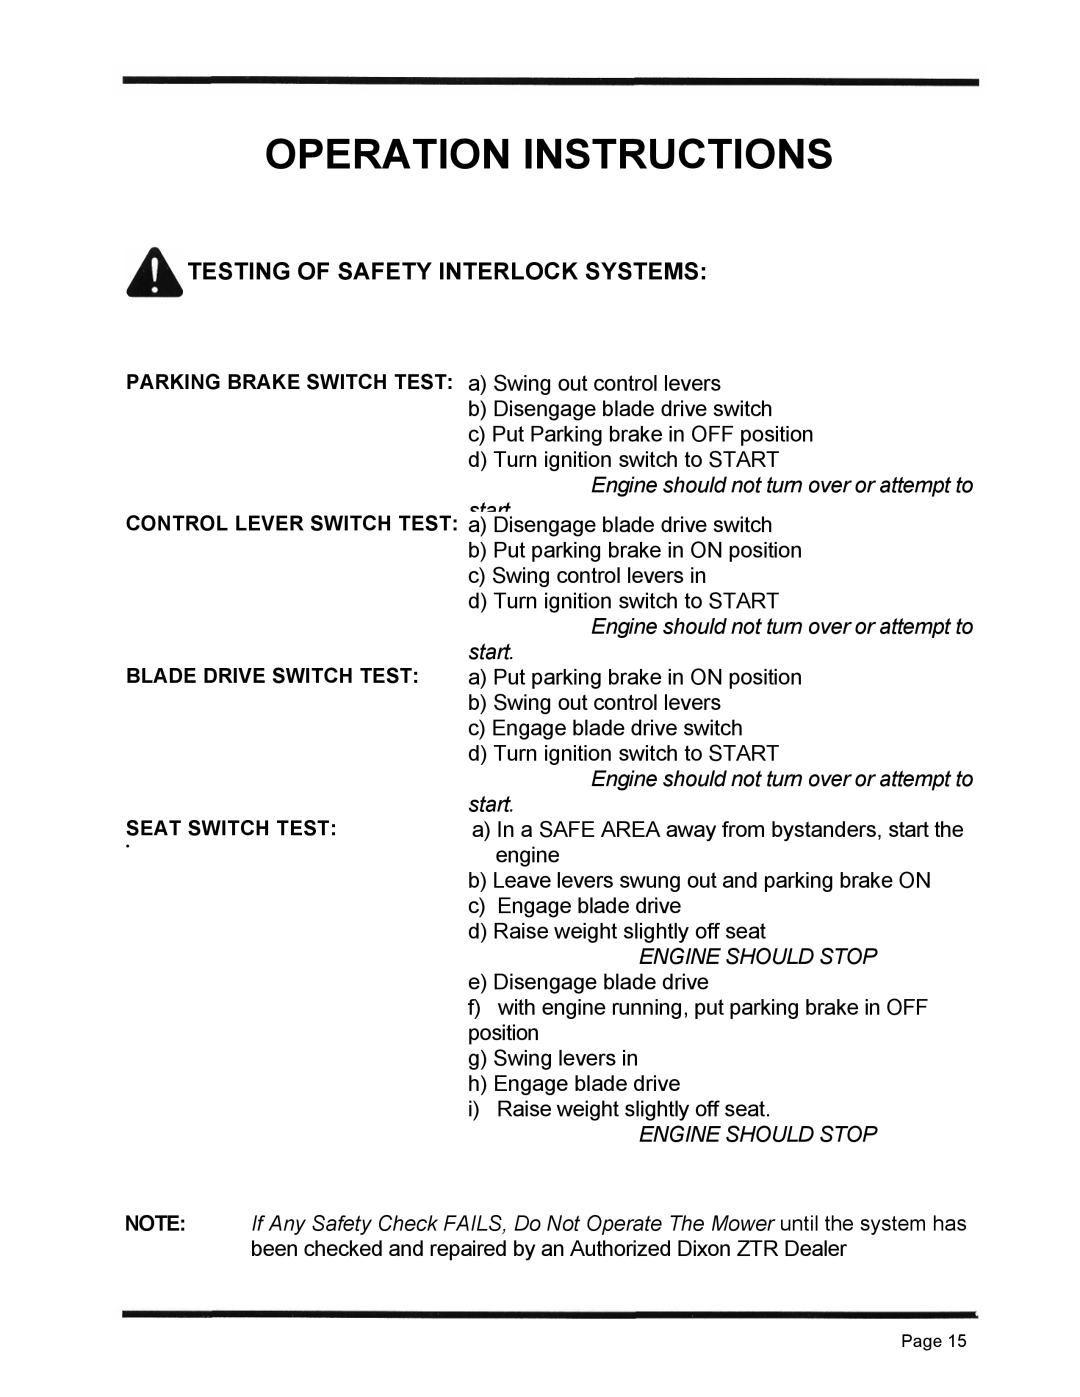 Dixon 4500 Series manual Operation Instructions, Testing Of Safety Interlock Systems, Engine Should Stop 